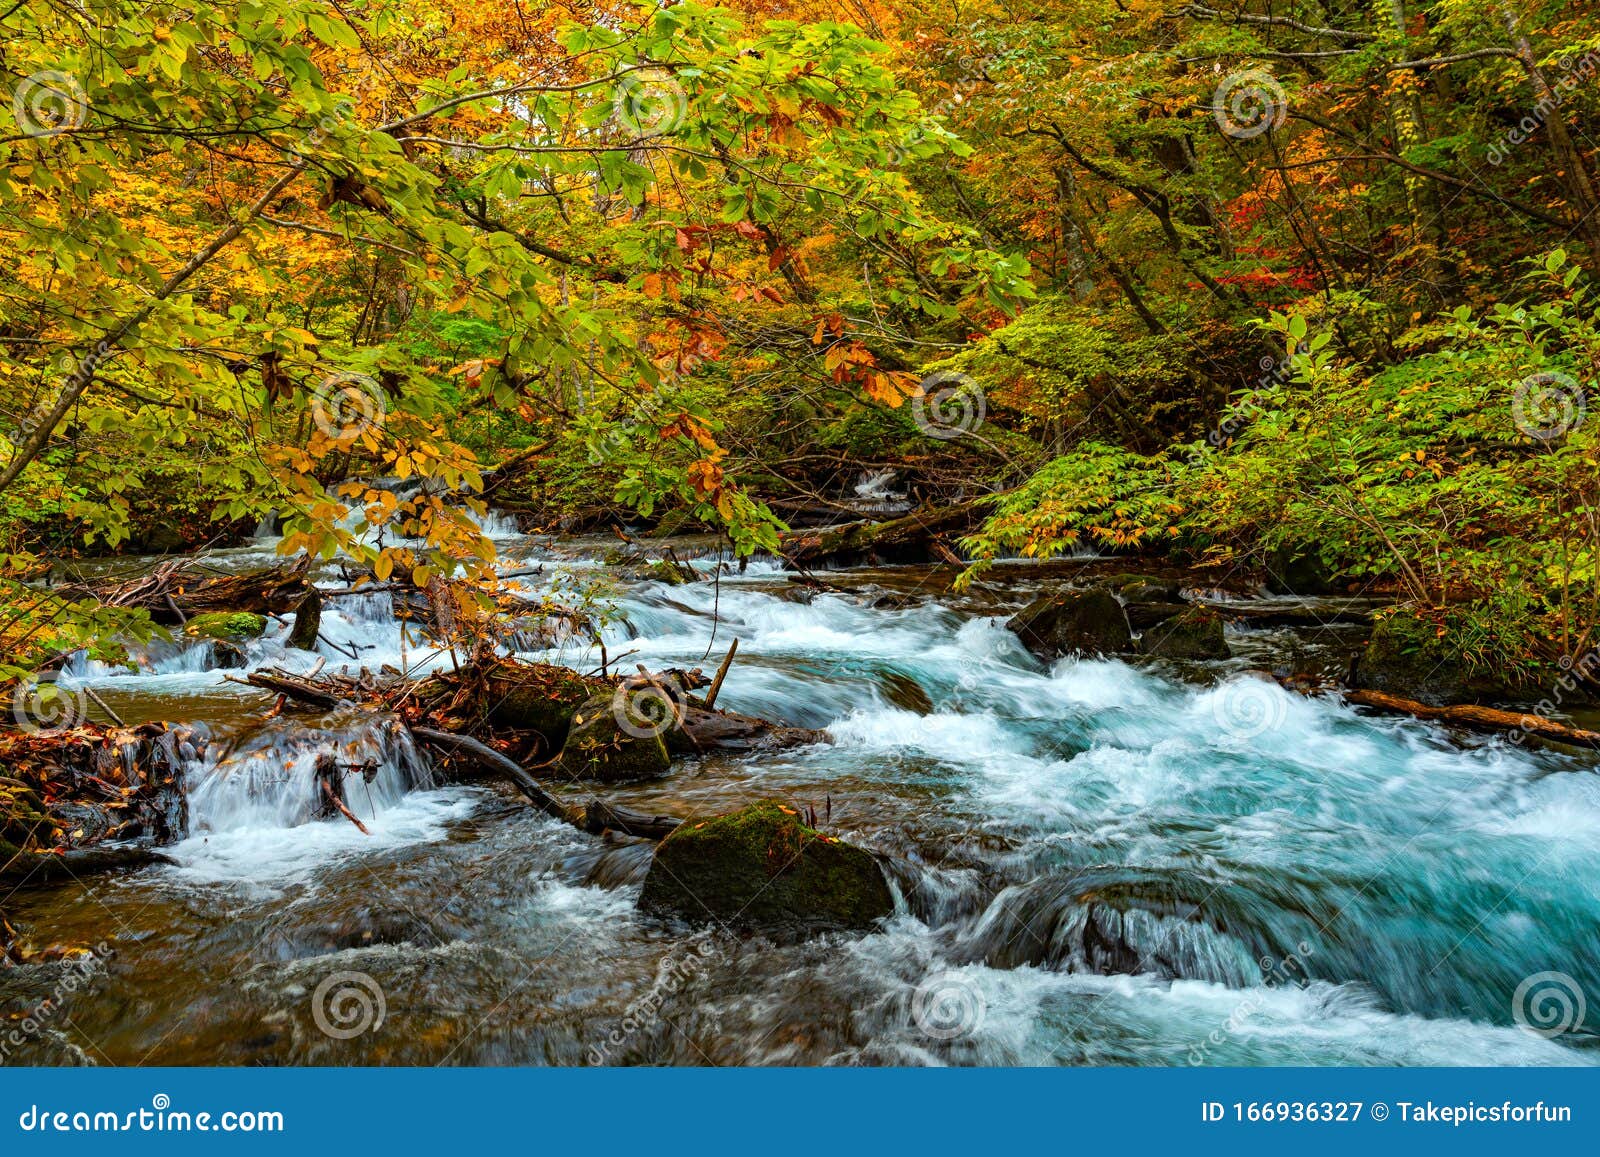 View Of Oirase Mountain Stream Flow Over Rocks Stock Image Image Of